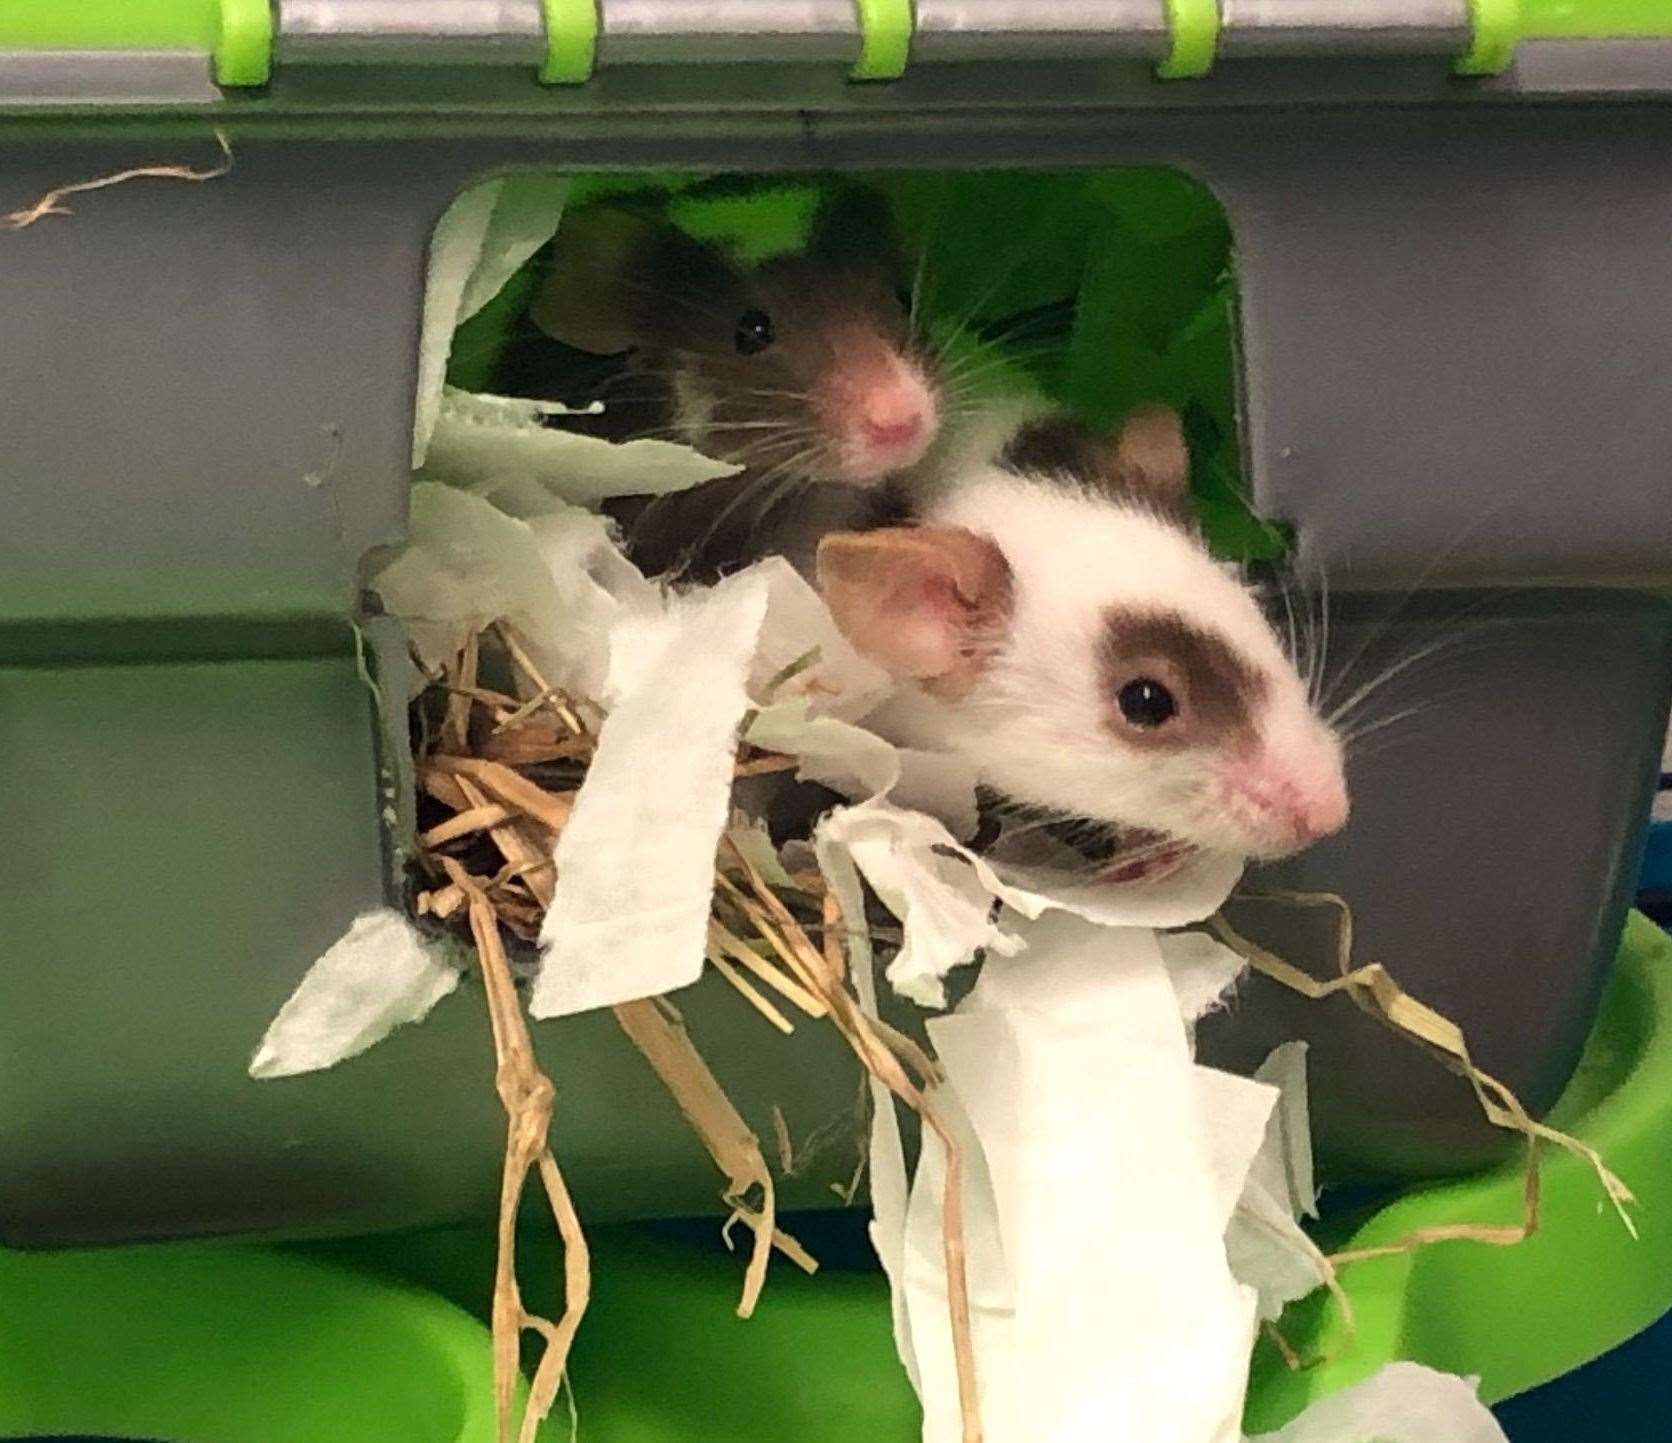 The mice have now been separated into suitable groups. Picture: RSPCA